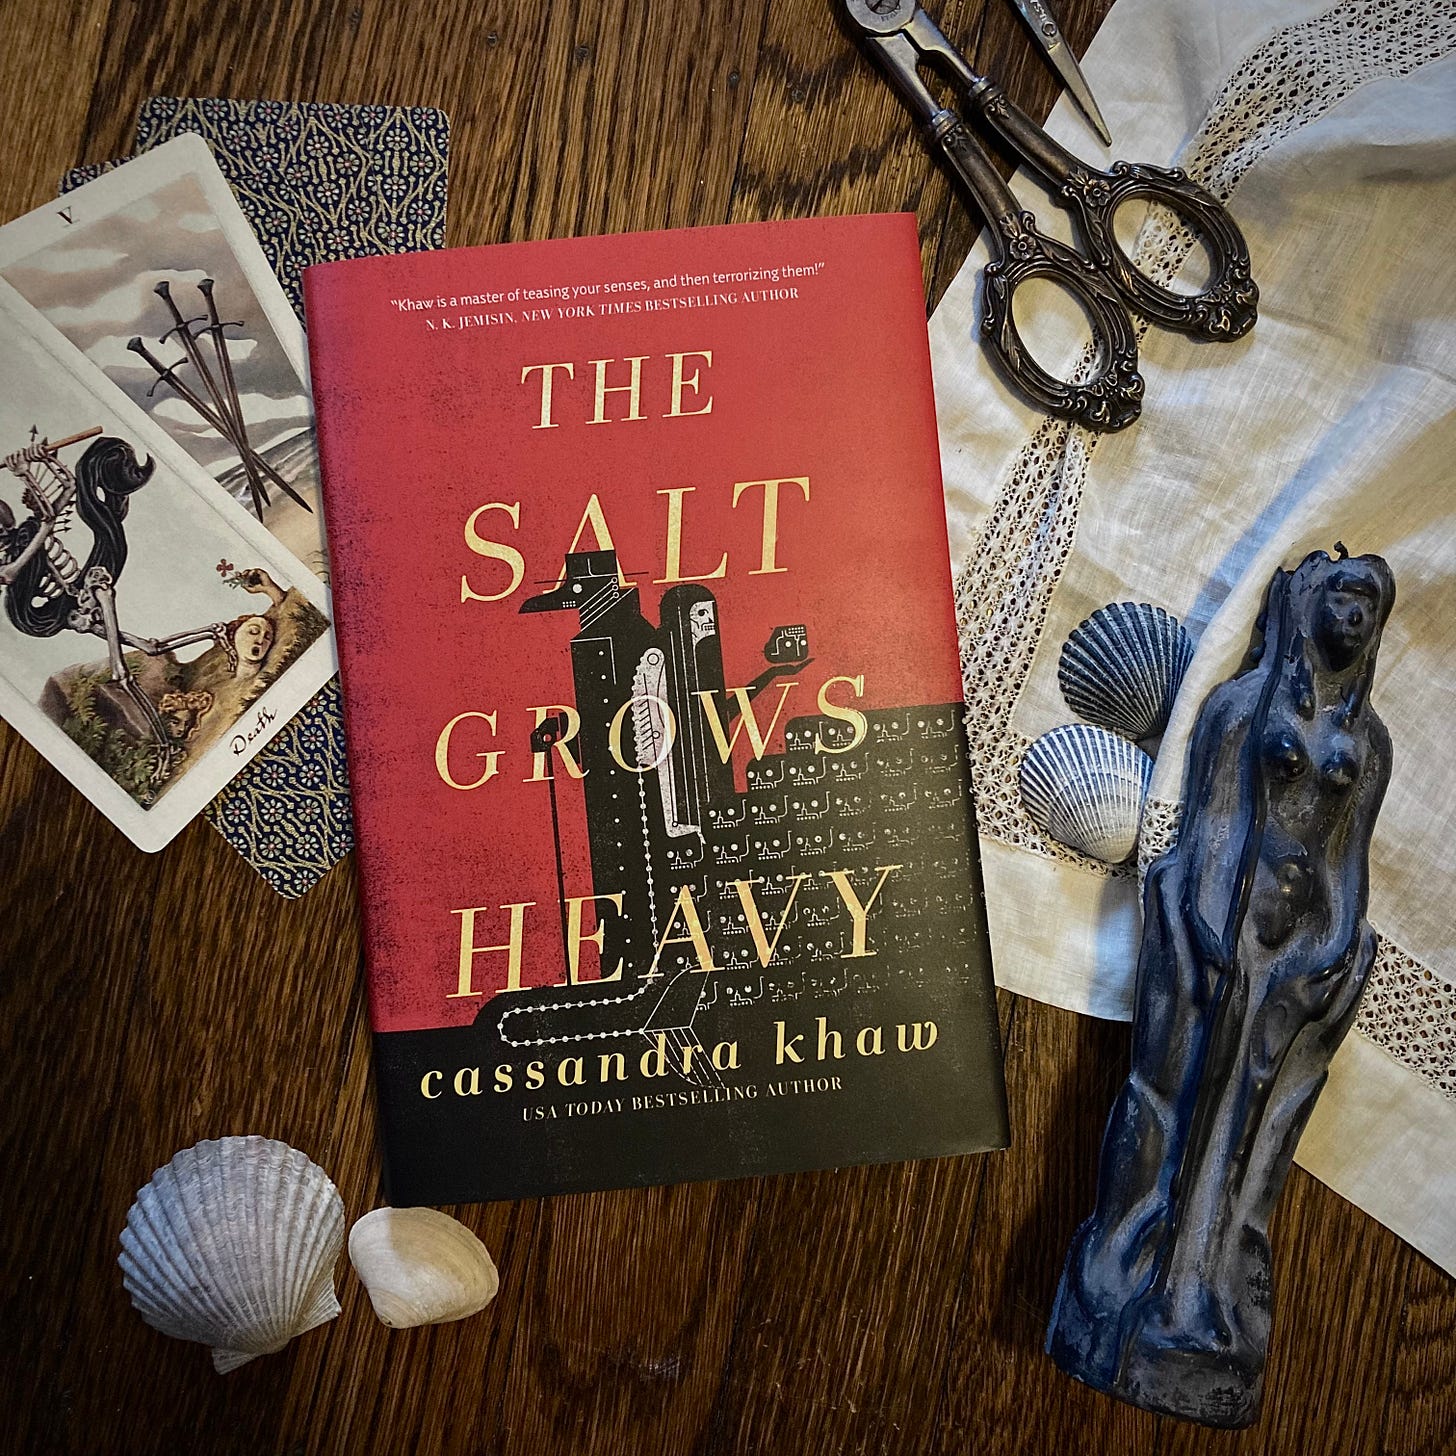 a copy of The Salt Grows Heavy in a flat lay on brown hardwood floors featuring tarot cards from the Pagan Otherworlds deck, seashells, a black candle in the shape of a woman and vintage silver scissors with an ornate handle